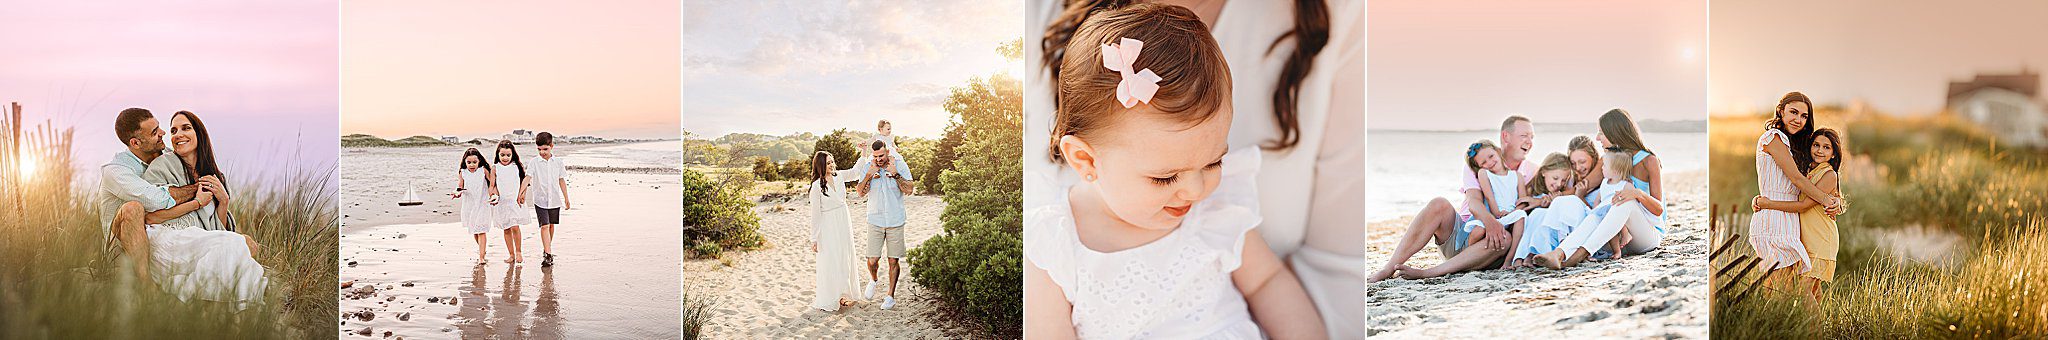 Summer Sessions by Helena Goessens Photography -Boston Newborn and Family Photographer 